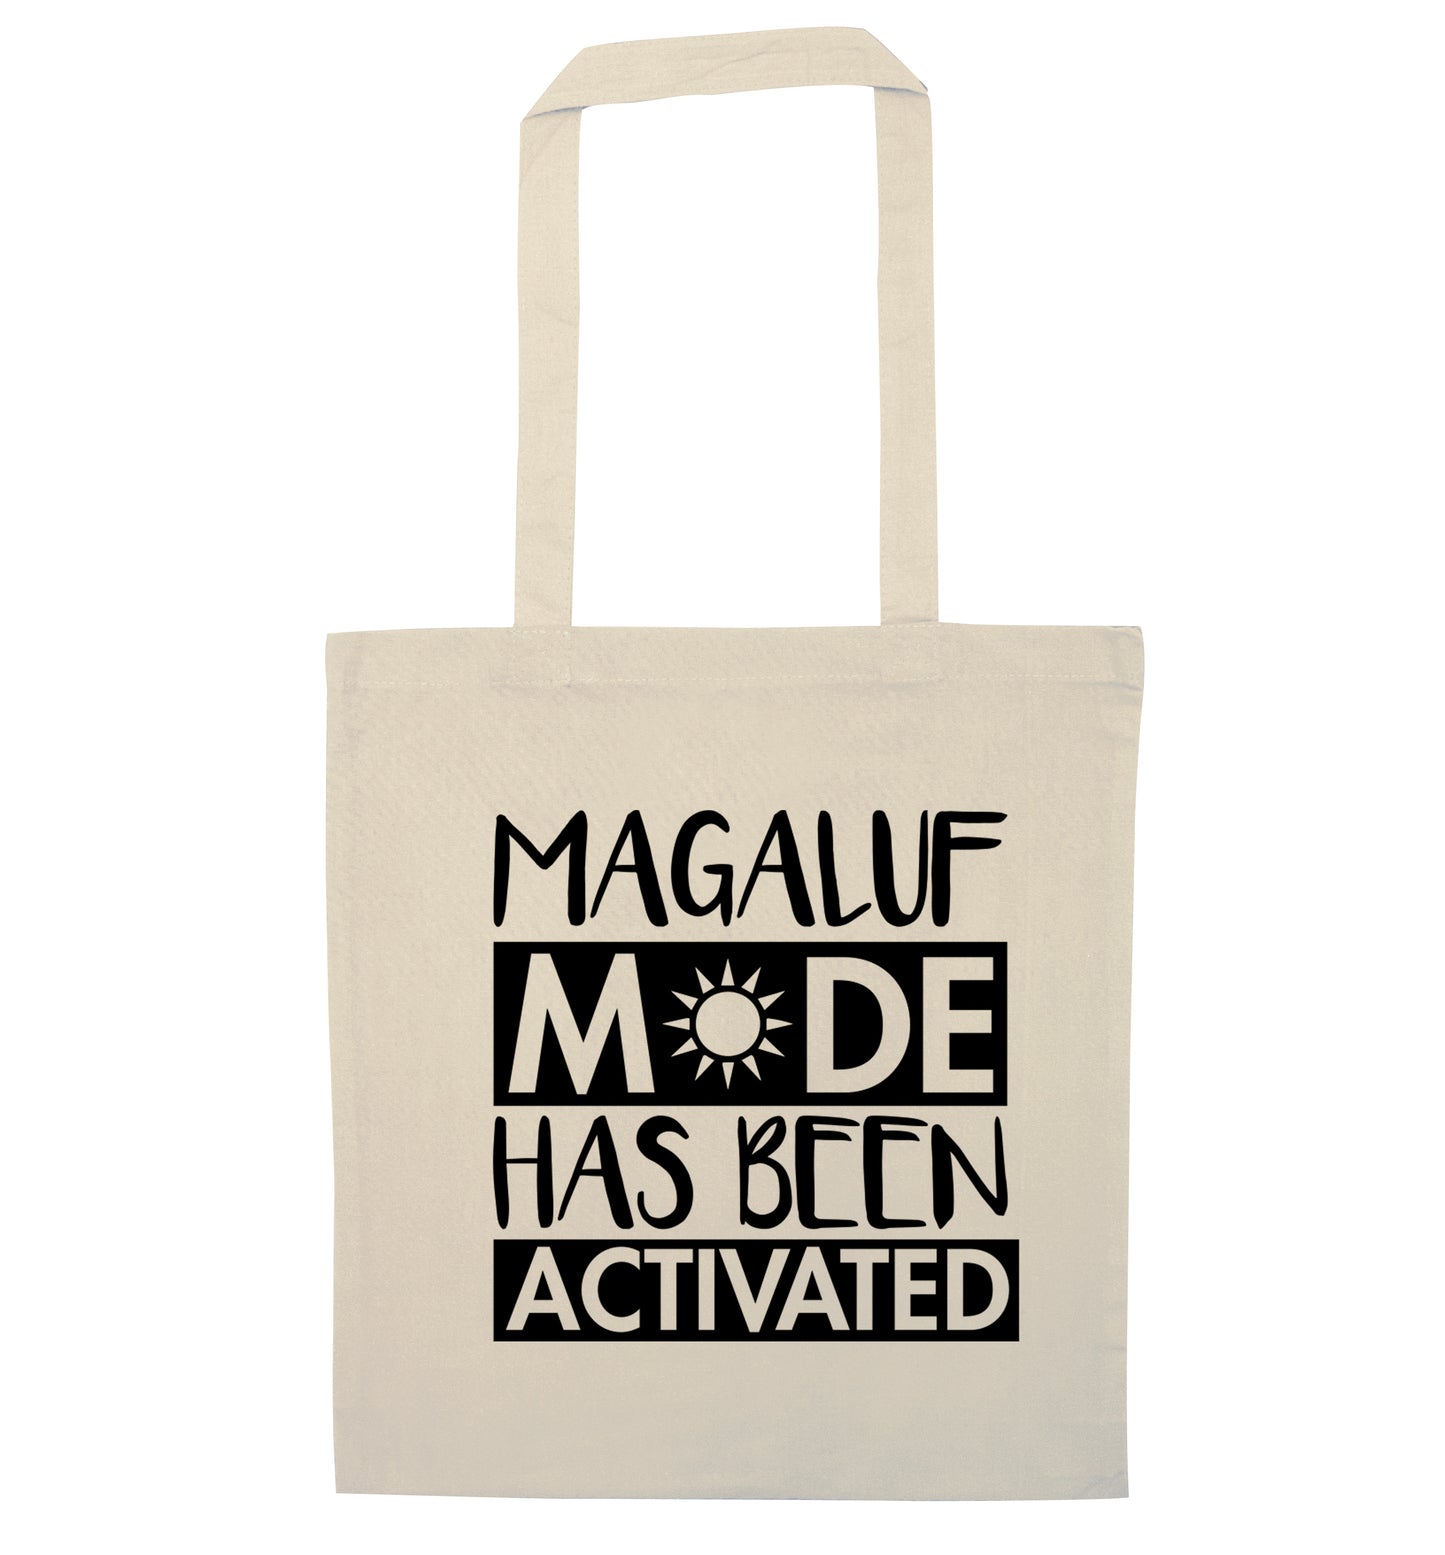 Magaluf mode has been activated natural tote bag